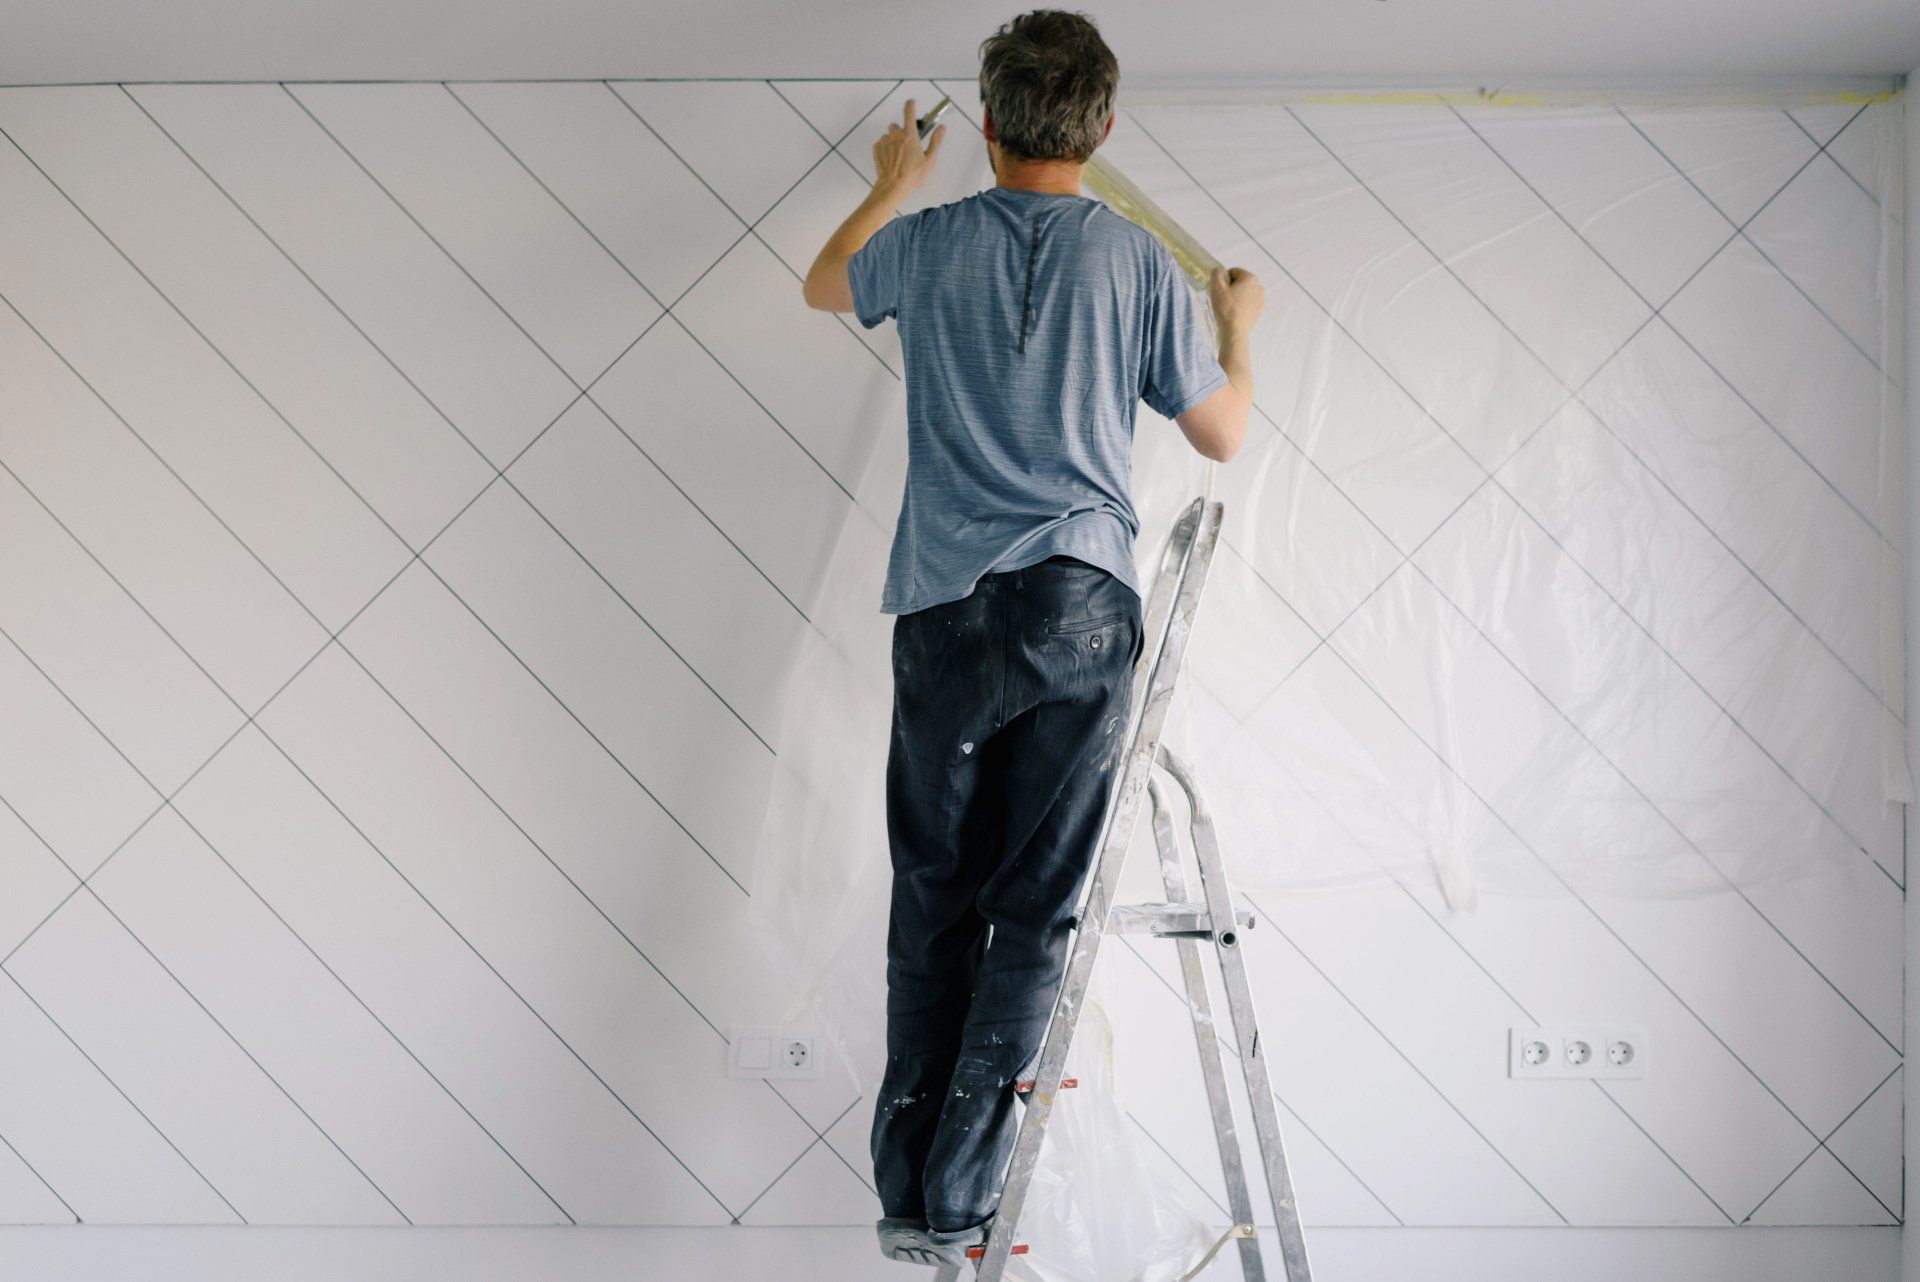 An experienced painter meticulously applies tape on a wall, preparing for a geometric paint design.